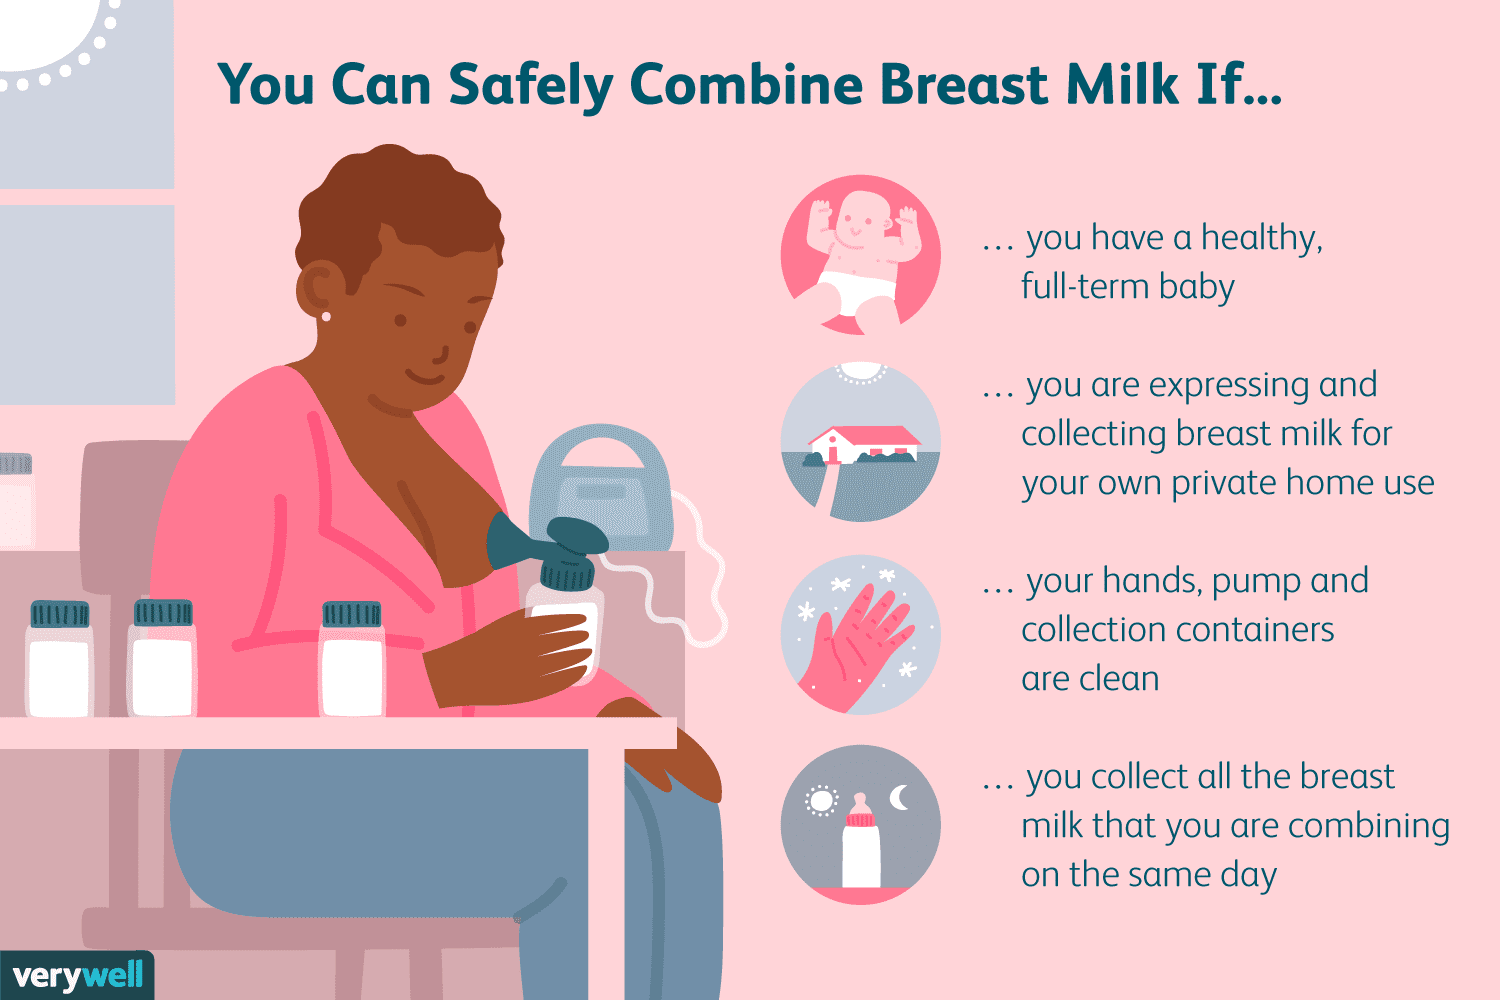 Can You Mix Fresh and Previously Collected Breast Milk?